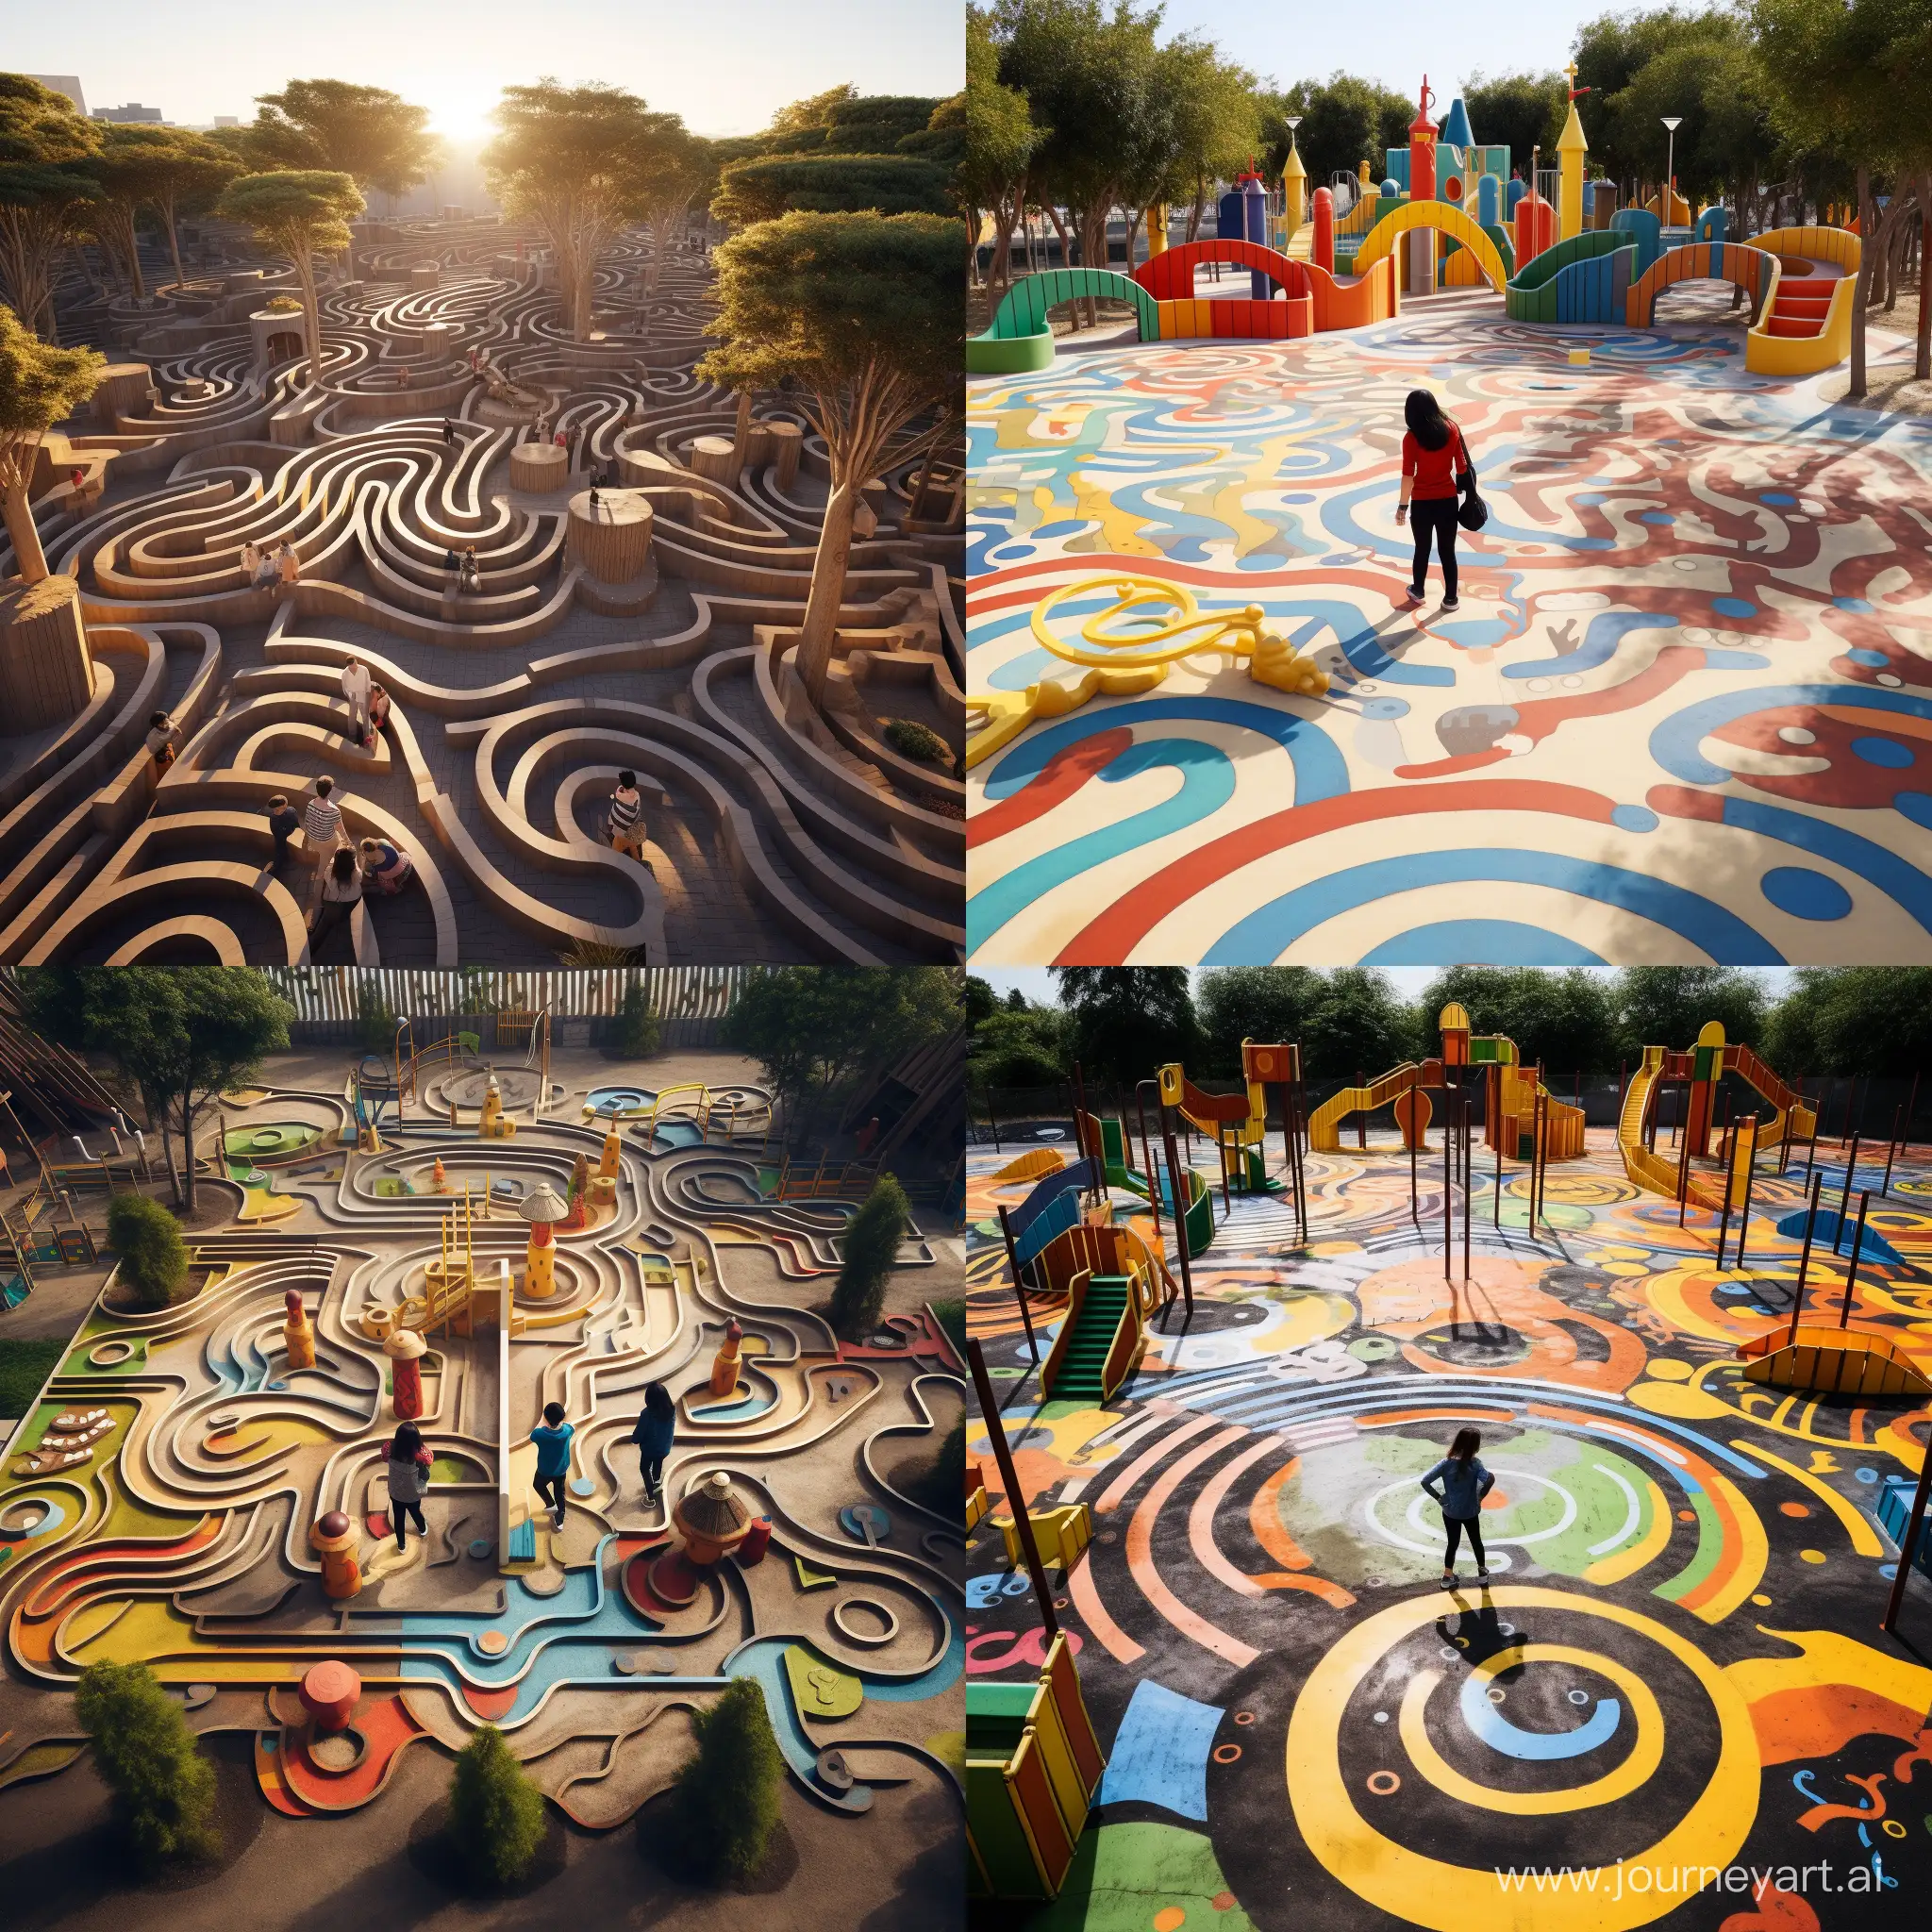 Children-Exploring-a-Whimsical-Labyrinth-Playground